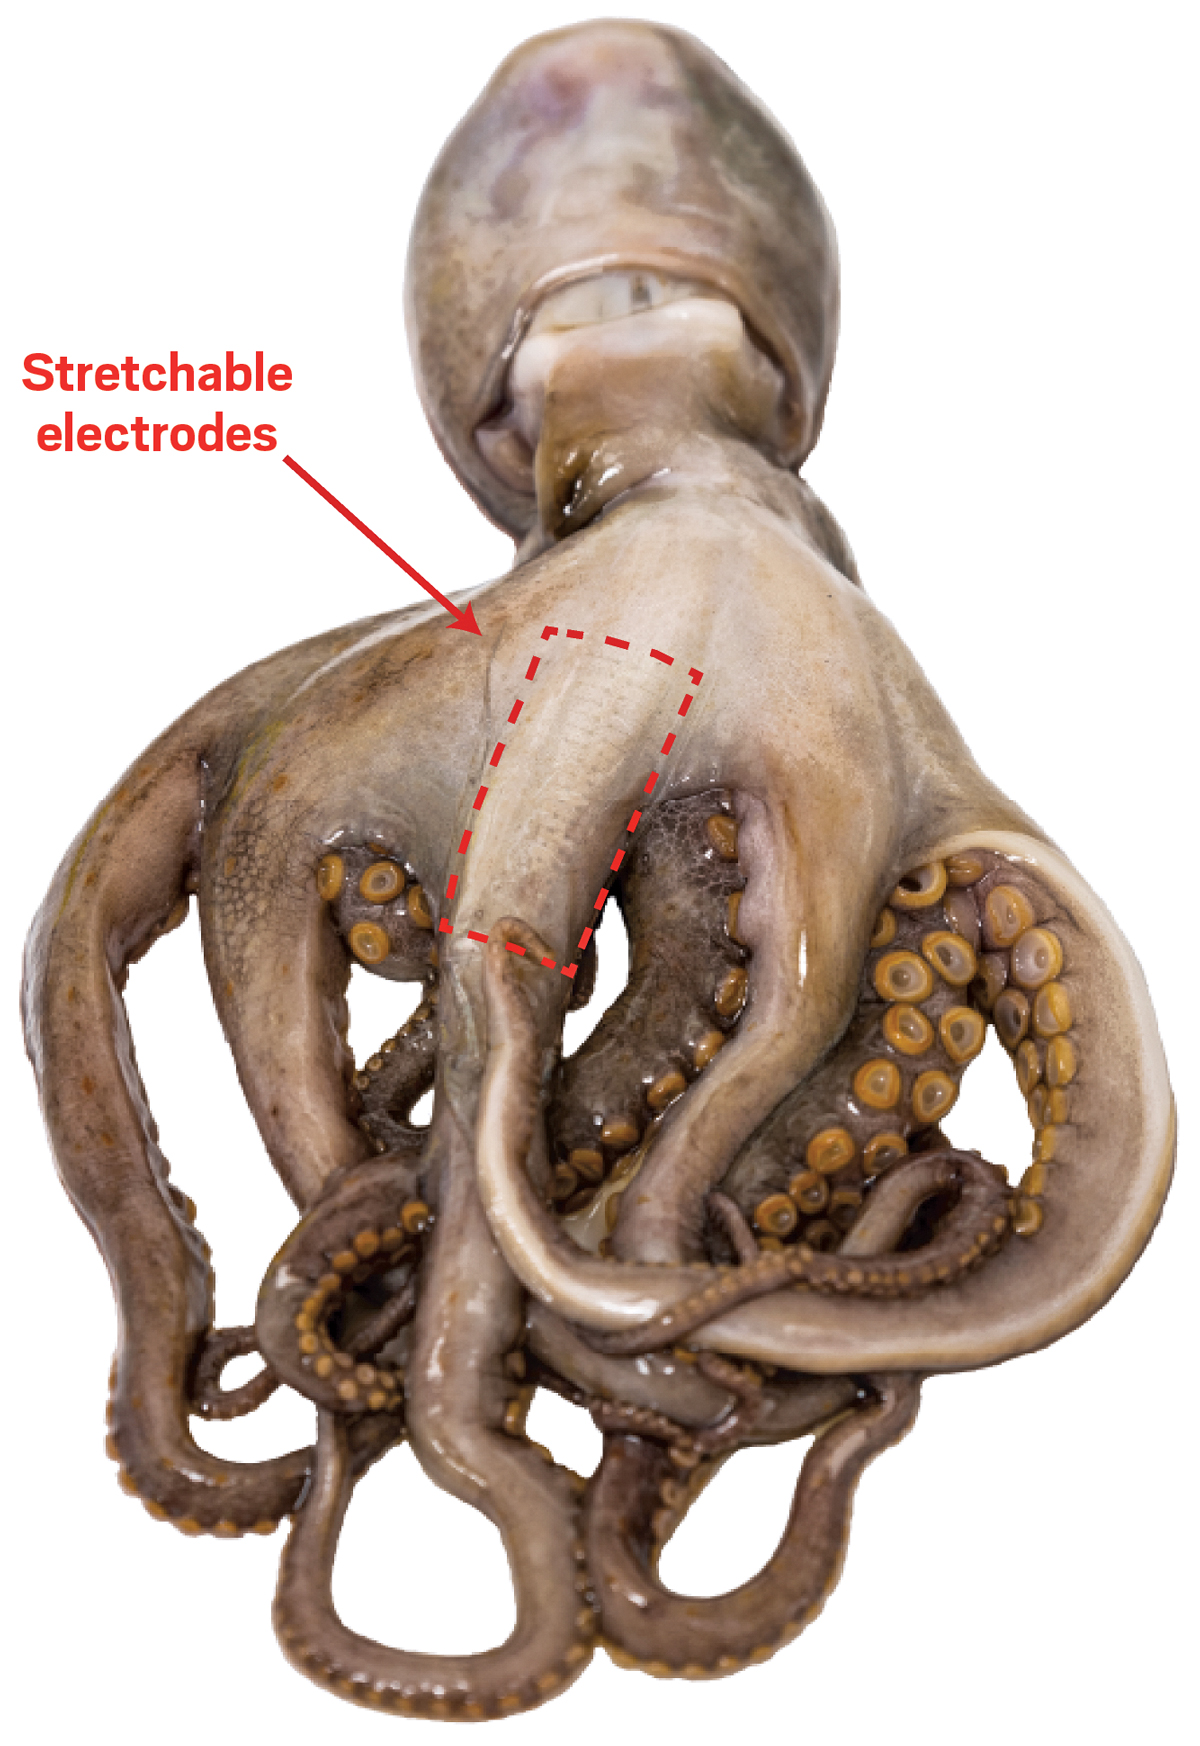 Tan-colored octopus with a dotted line indicating placement of the electrode array on the skin of its tentacle.